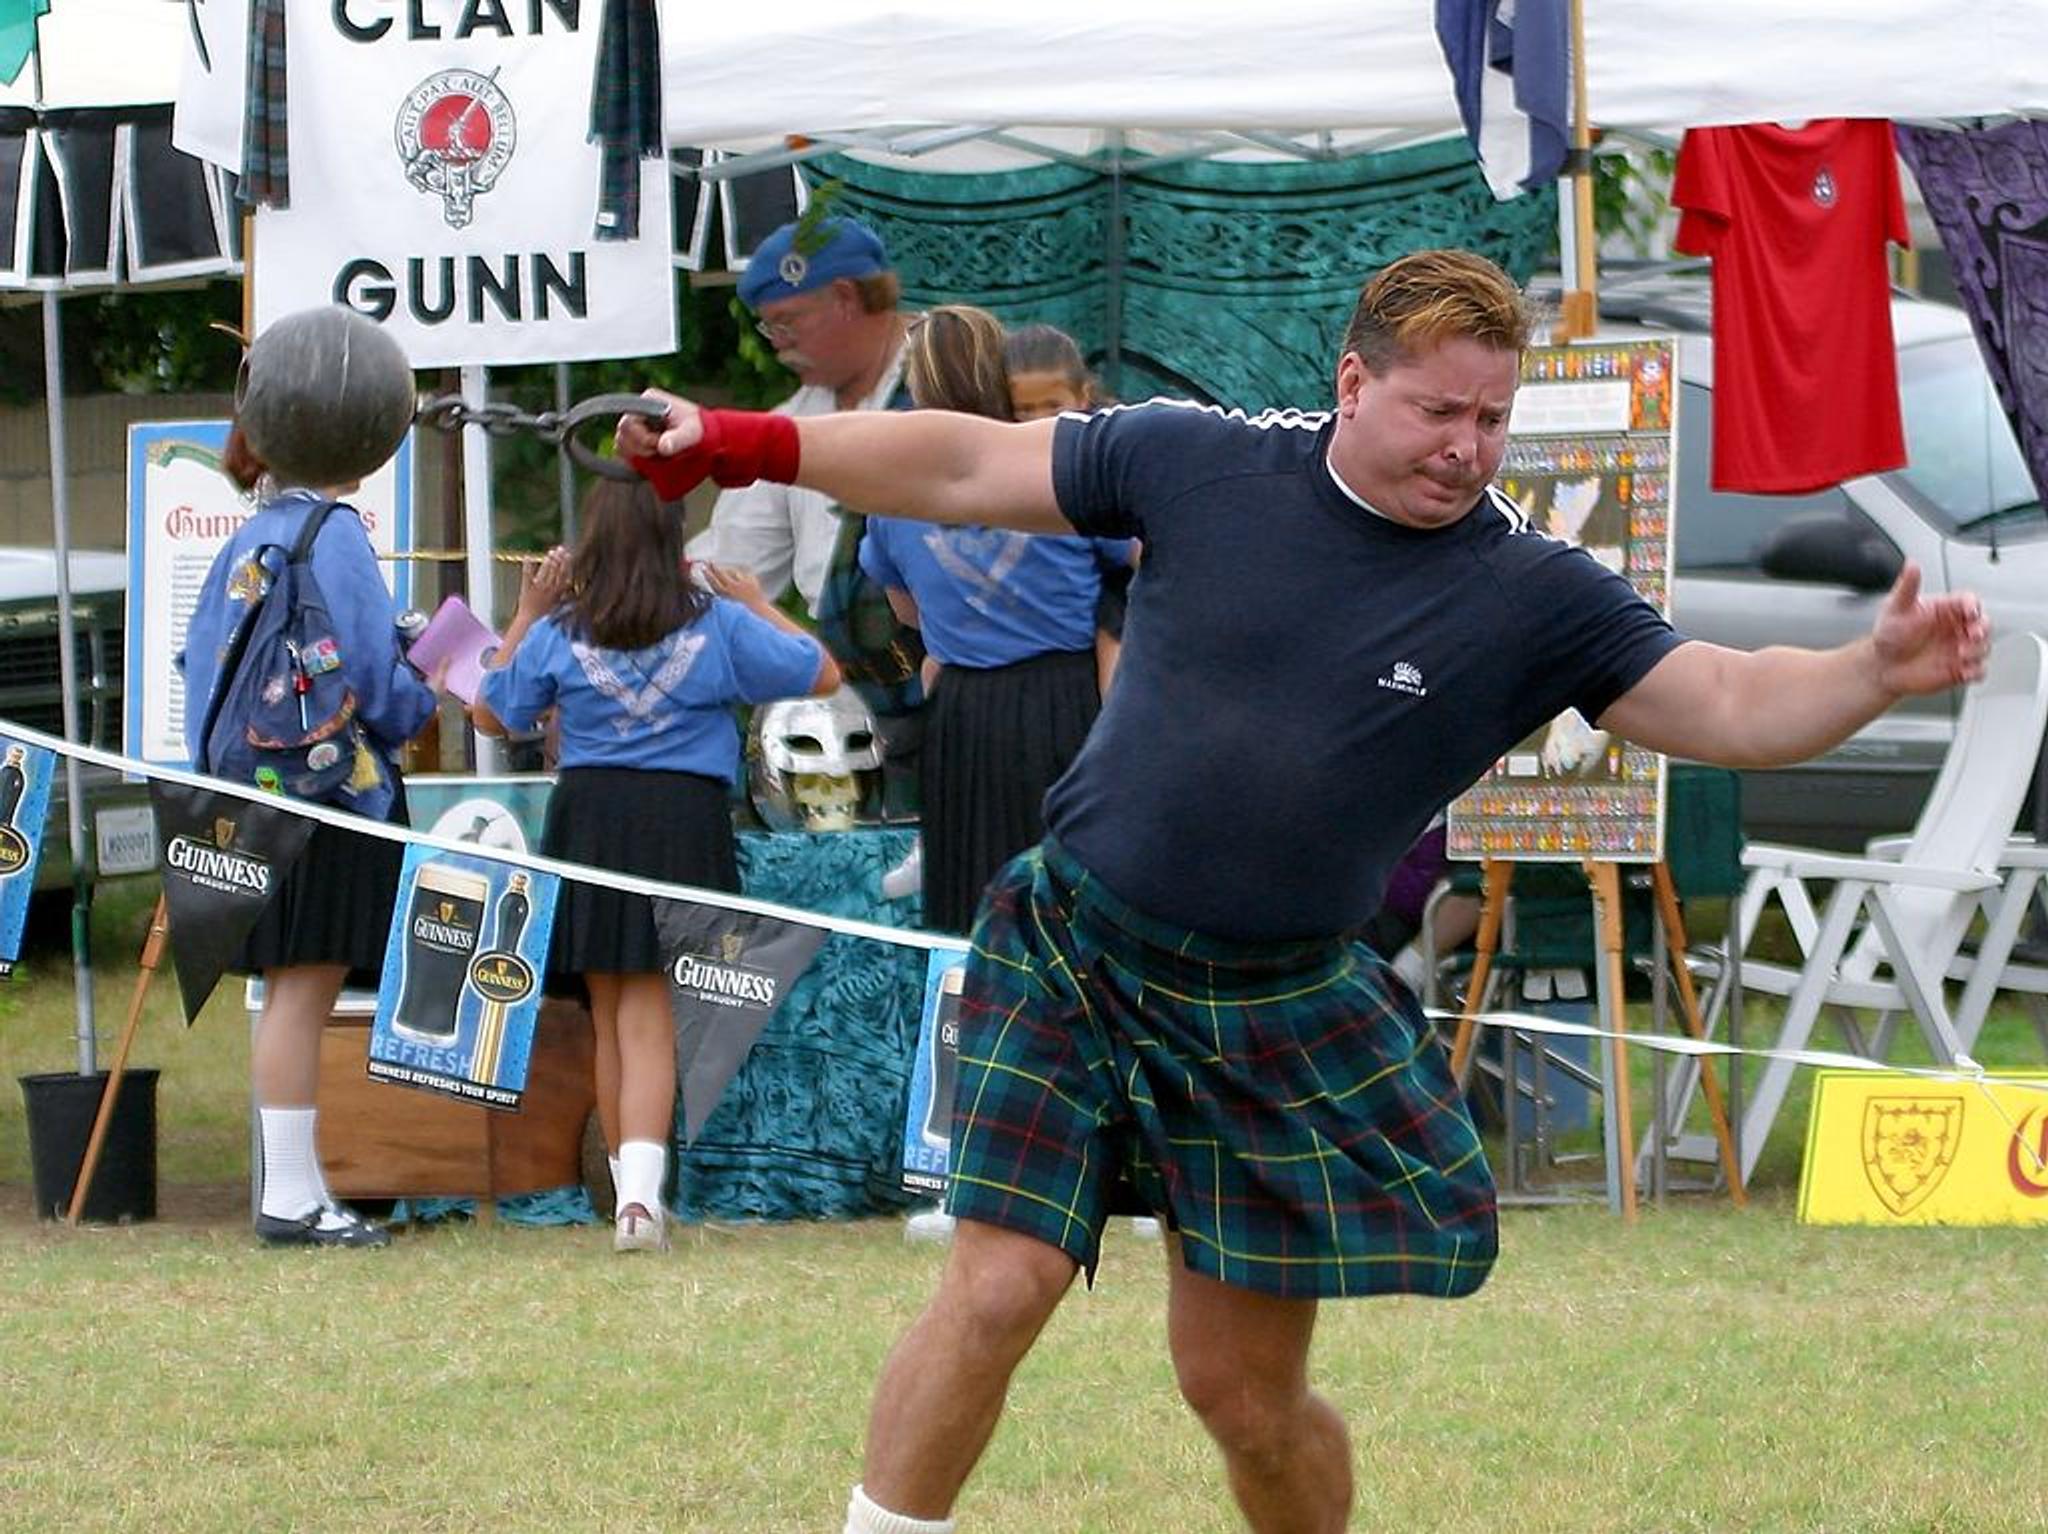 Weight throw in the traditional Scottish Highland Games